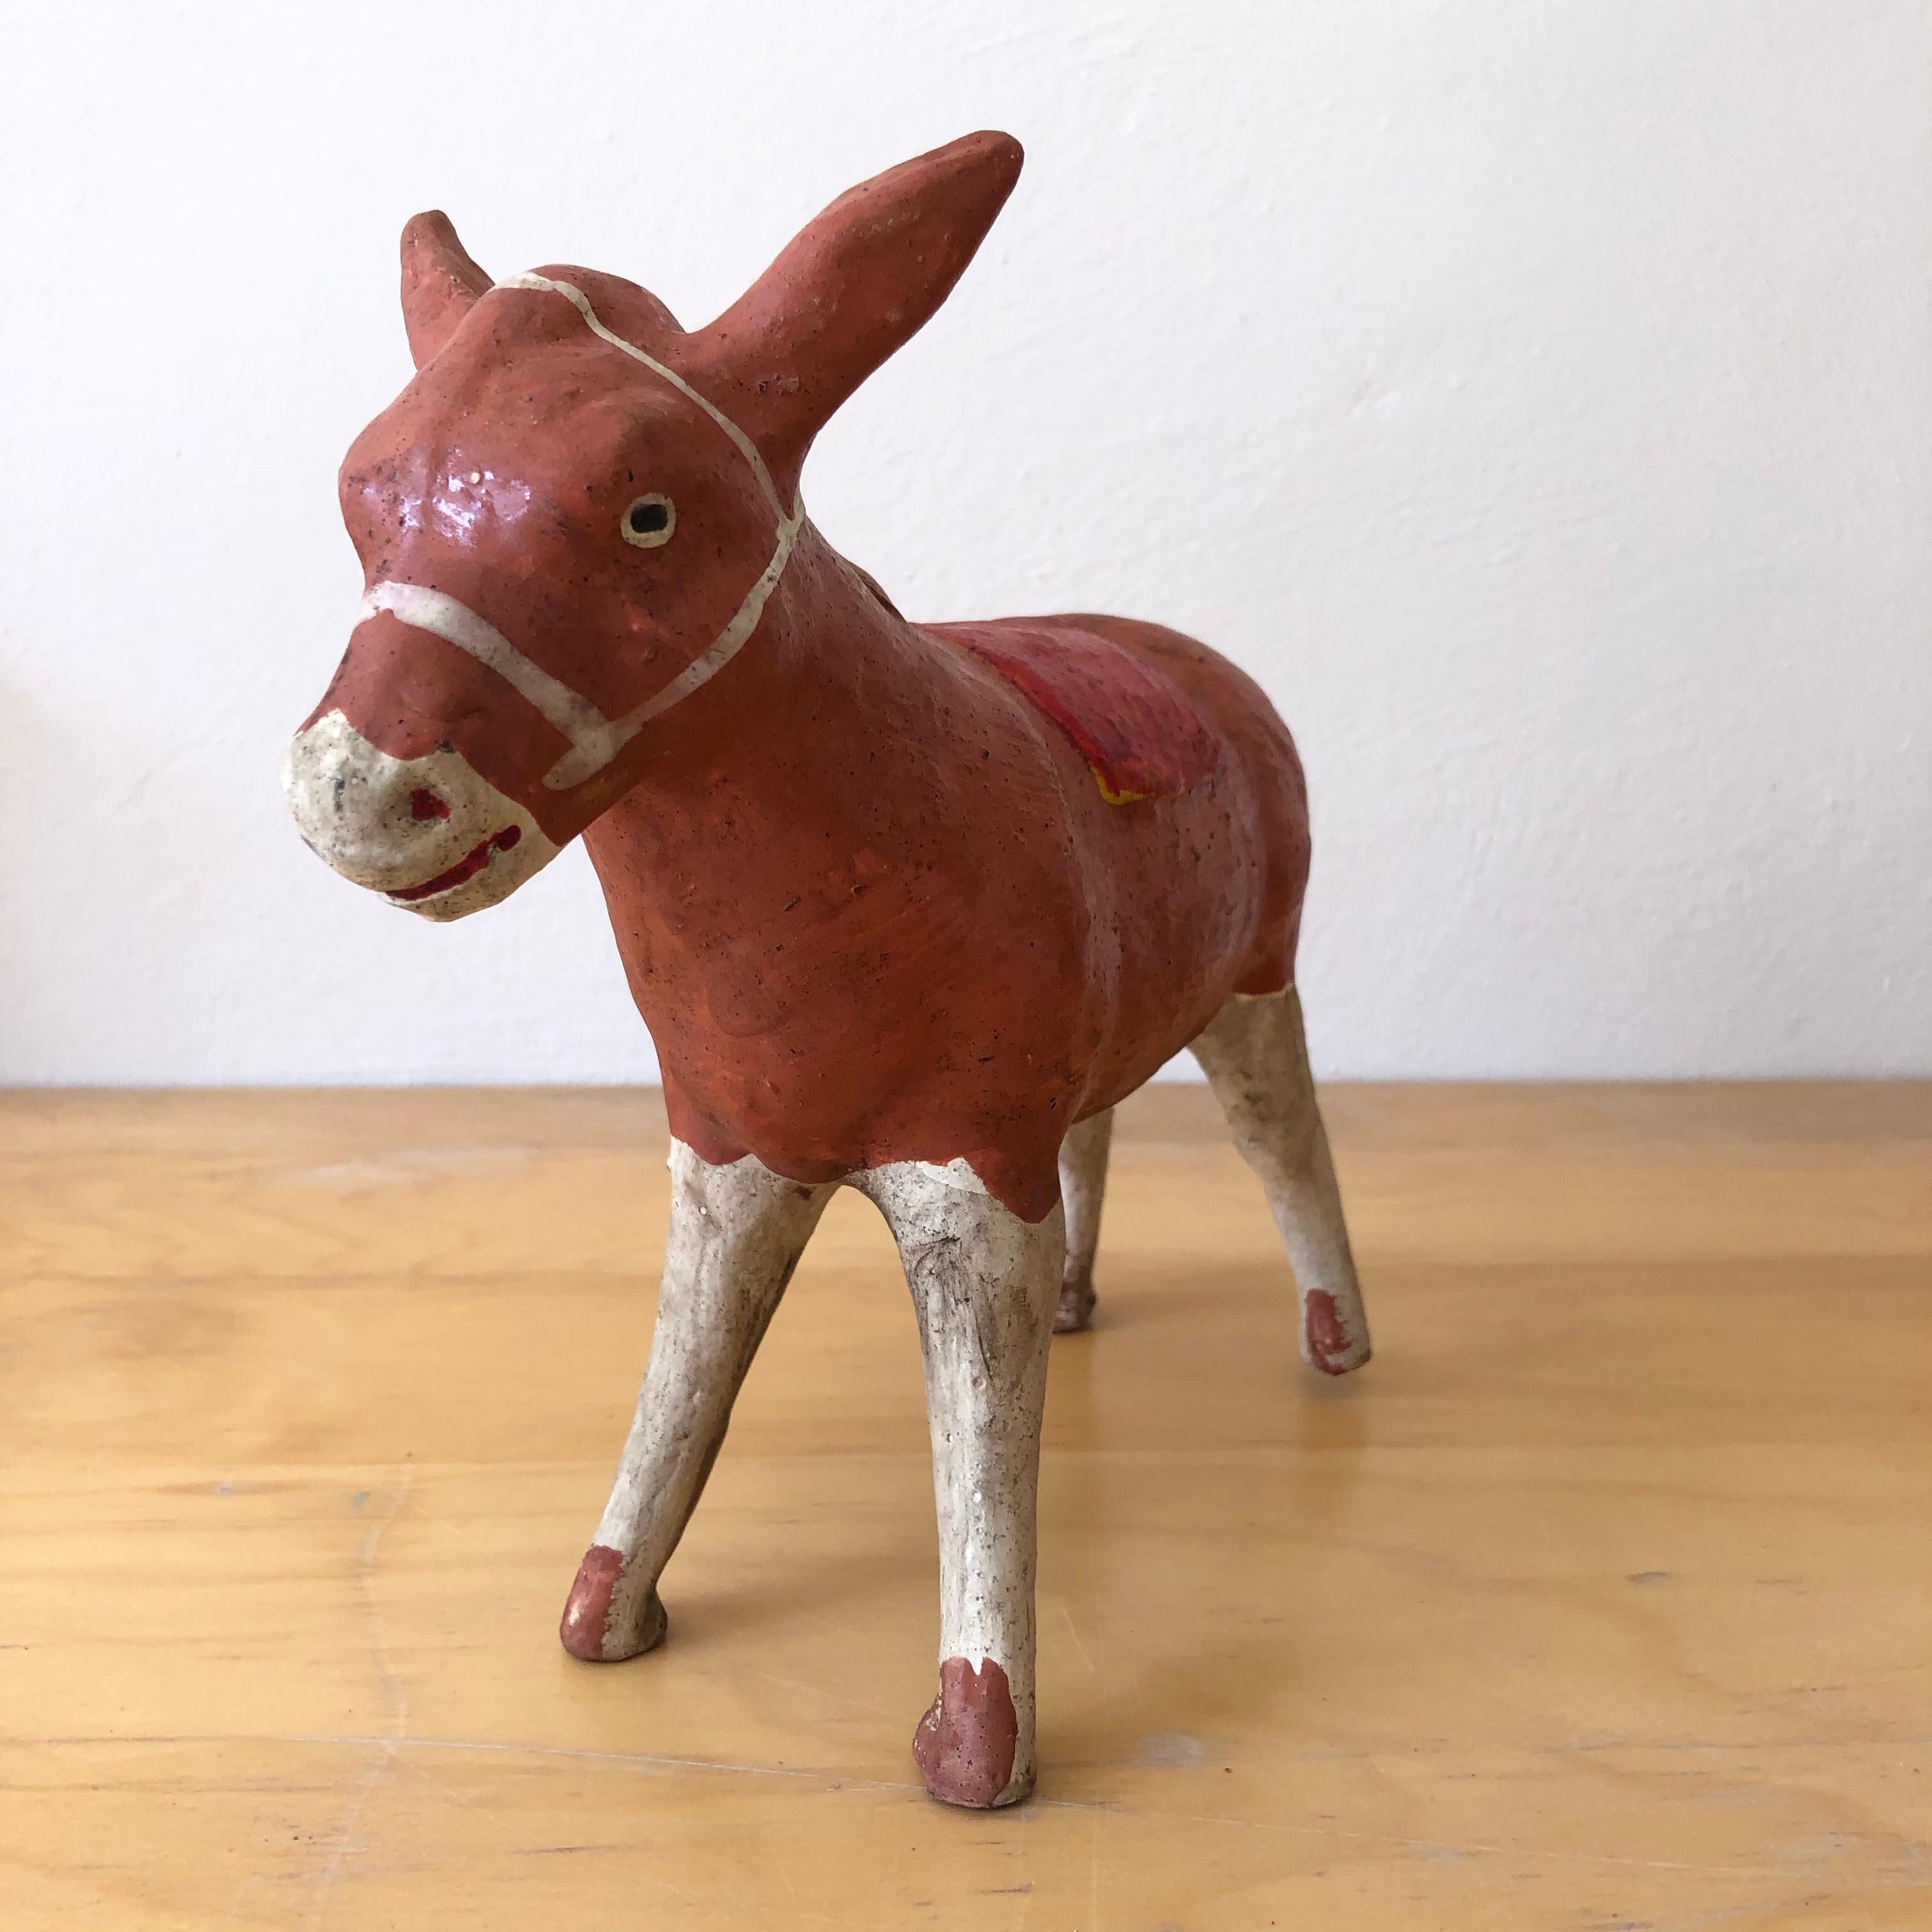 Terracotta colored burro piggy bank from the border area of the state of Mexico with Guerrero. Classic Folk Art ceramic pieces that are hard to come by given their fragile nature, circa 1980s.